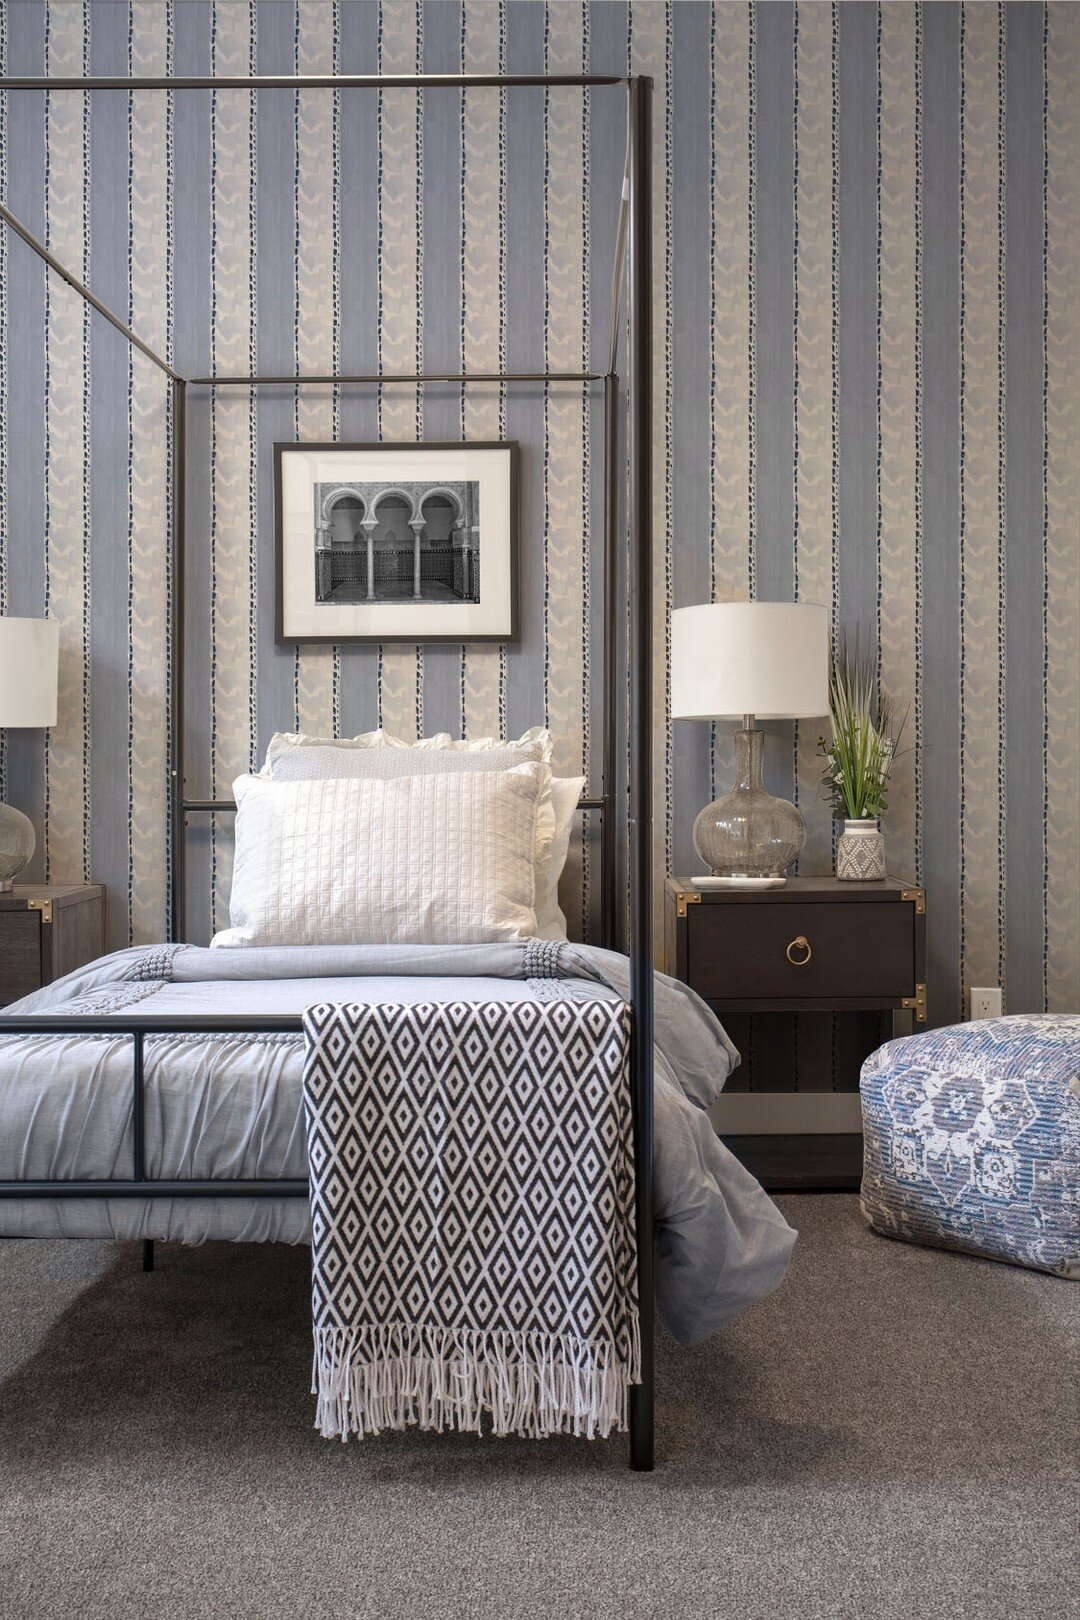 New Traditional design melds the classics with approachable, and livable, and that's just what this Guest Room offers. The four-poster bed in modern materials, the campaign chest, and the fresh take on striped wallpaper all create a welcoming space.
